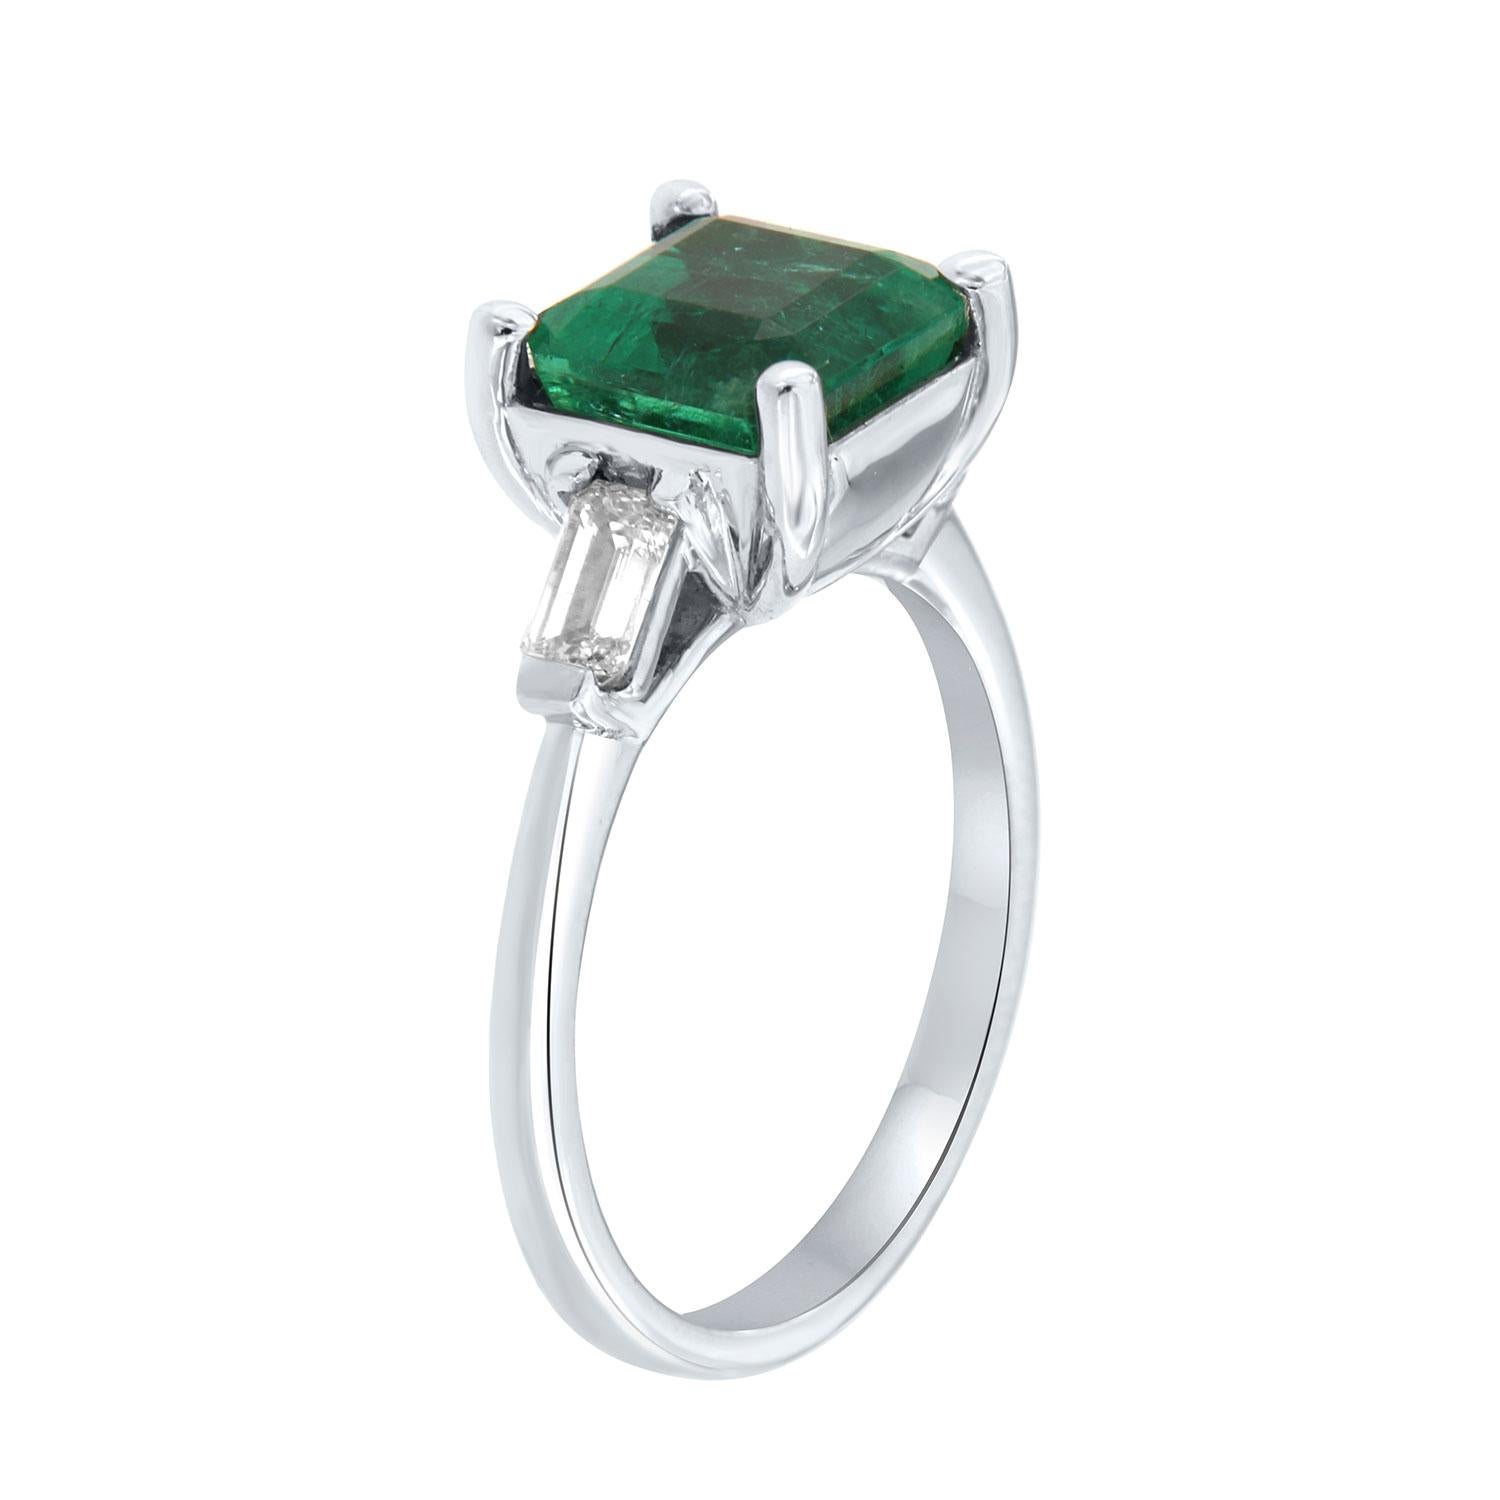 This classic Platinum ring features a 2.54 Carat Asscher cut shaped green Natural Emerald flanked by two(2) Baguette-shaped diamonds in a total weight of 0.40 Carat on a 1.7 mm wide band. 
This Ethiopian Emerald exhibits a bright green color in a